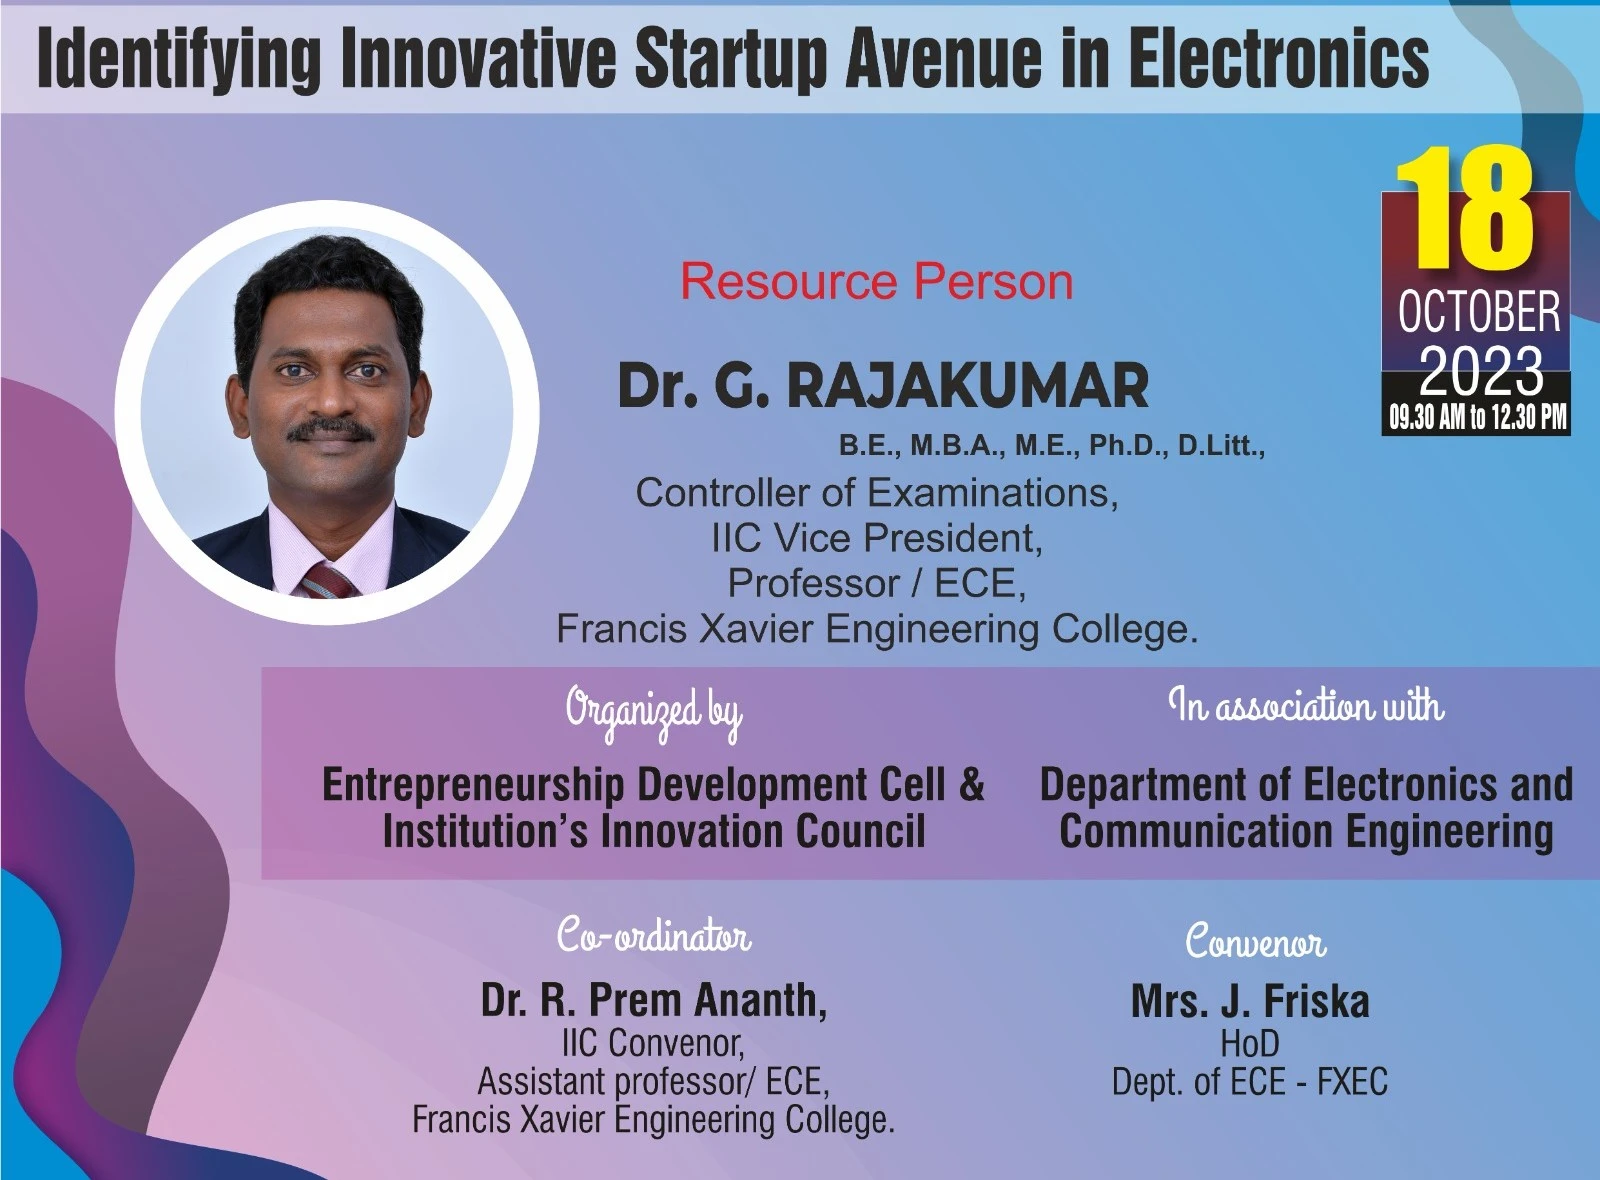 Identifying Innovative Startup Avenue in Electronics